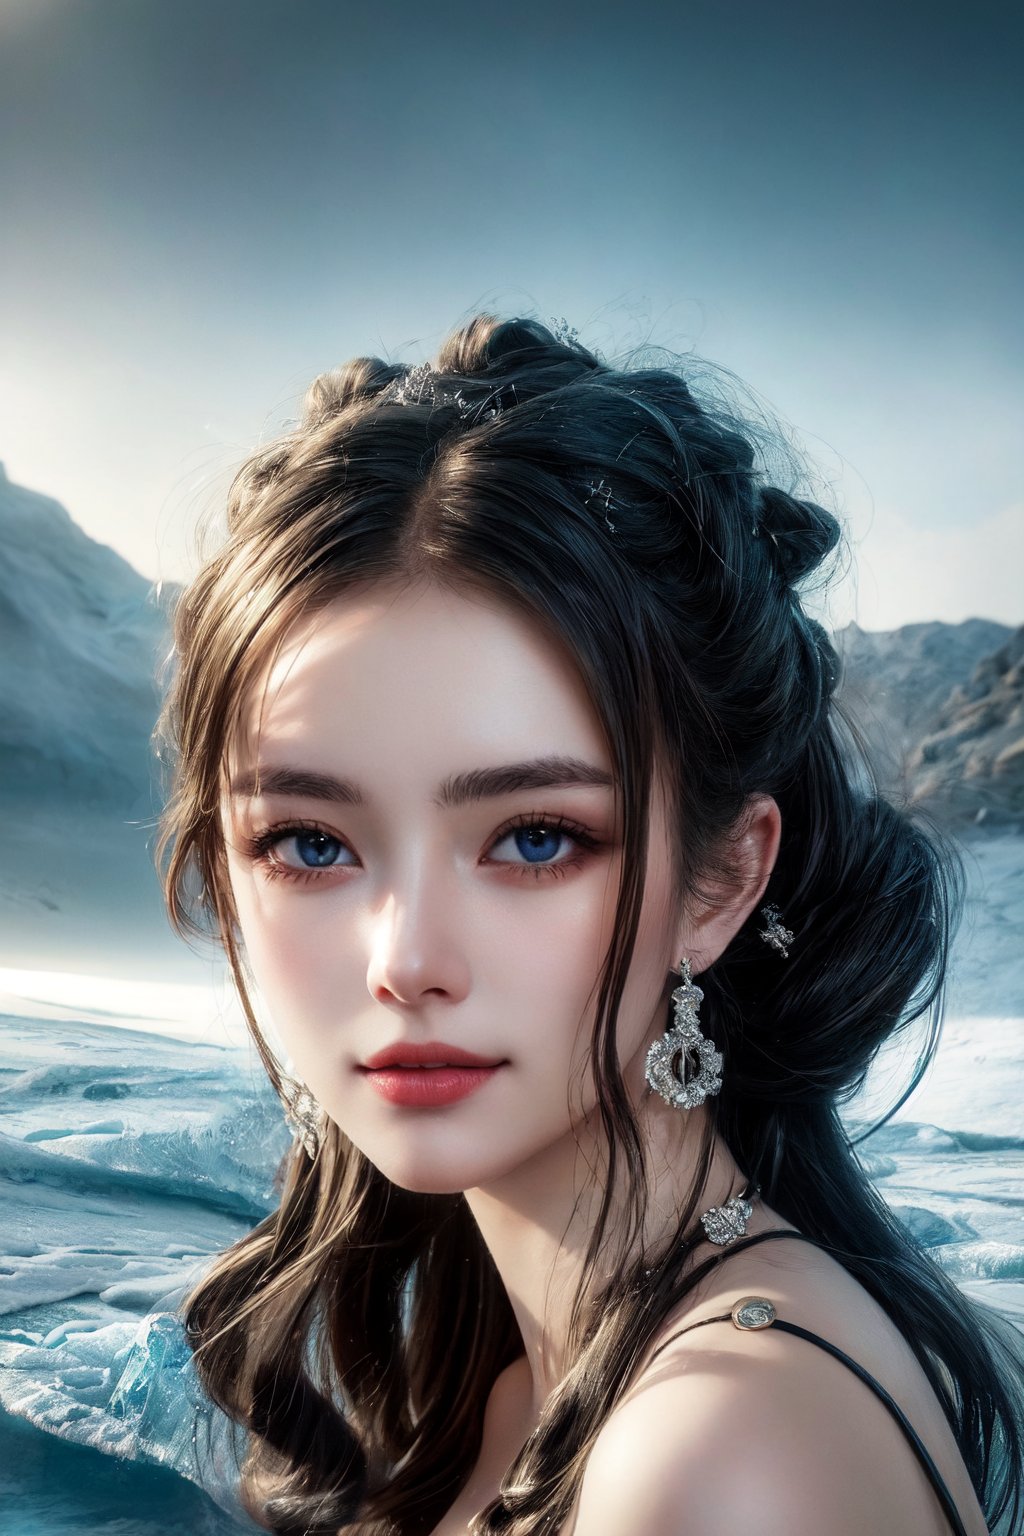 (masterpiece, high quality:1.5), 8K, HDR, 
1girl, well_defined_face, well_defined_eyes, ultra_detailed_eyes, ultra_detailed_face, by FuturEvoLab, 
ethereal lighting, immortal, elegant, porcelain skin, jet-black hair, waves, pale face, ice-blue eyes, blood-red lips, pinhole photograph, retro aesthetic, monochromatic backdrop, mysterious, enigmatic, timeless allure, the siren of the night, secrets, longing, hidden dangers, captivating, nostalgia, timeless fascination, Edge feathering and holy light, 